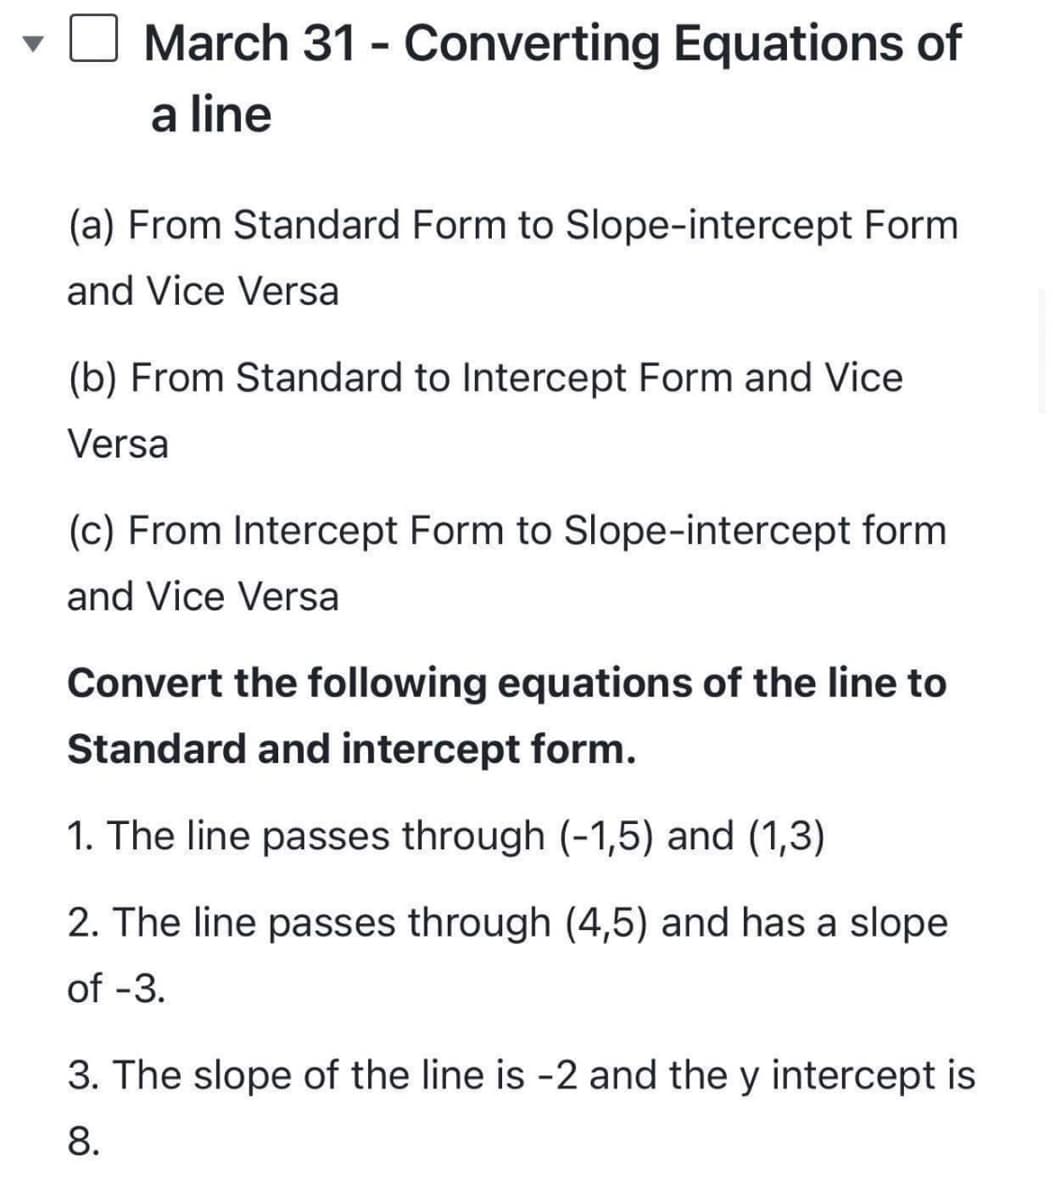 March 31 - Converting Equations of
a line
(a) From Standard Form to Slope-intercept Form
and Vice Versa
(b) From Standard to Intercept Form and Vice
Versa
(c) From Intercept Form to Slope-intercept form
and Vice Versa
Convert the following equations of the line to
Standard and intercept form.
1. The line passes through (-1,5) and (1,3)
2. The line passes through (4,5) and has a slope
of -3.
3. The slope of the line is -2 and the y intercept is
8.